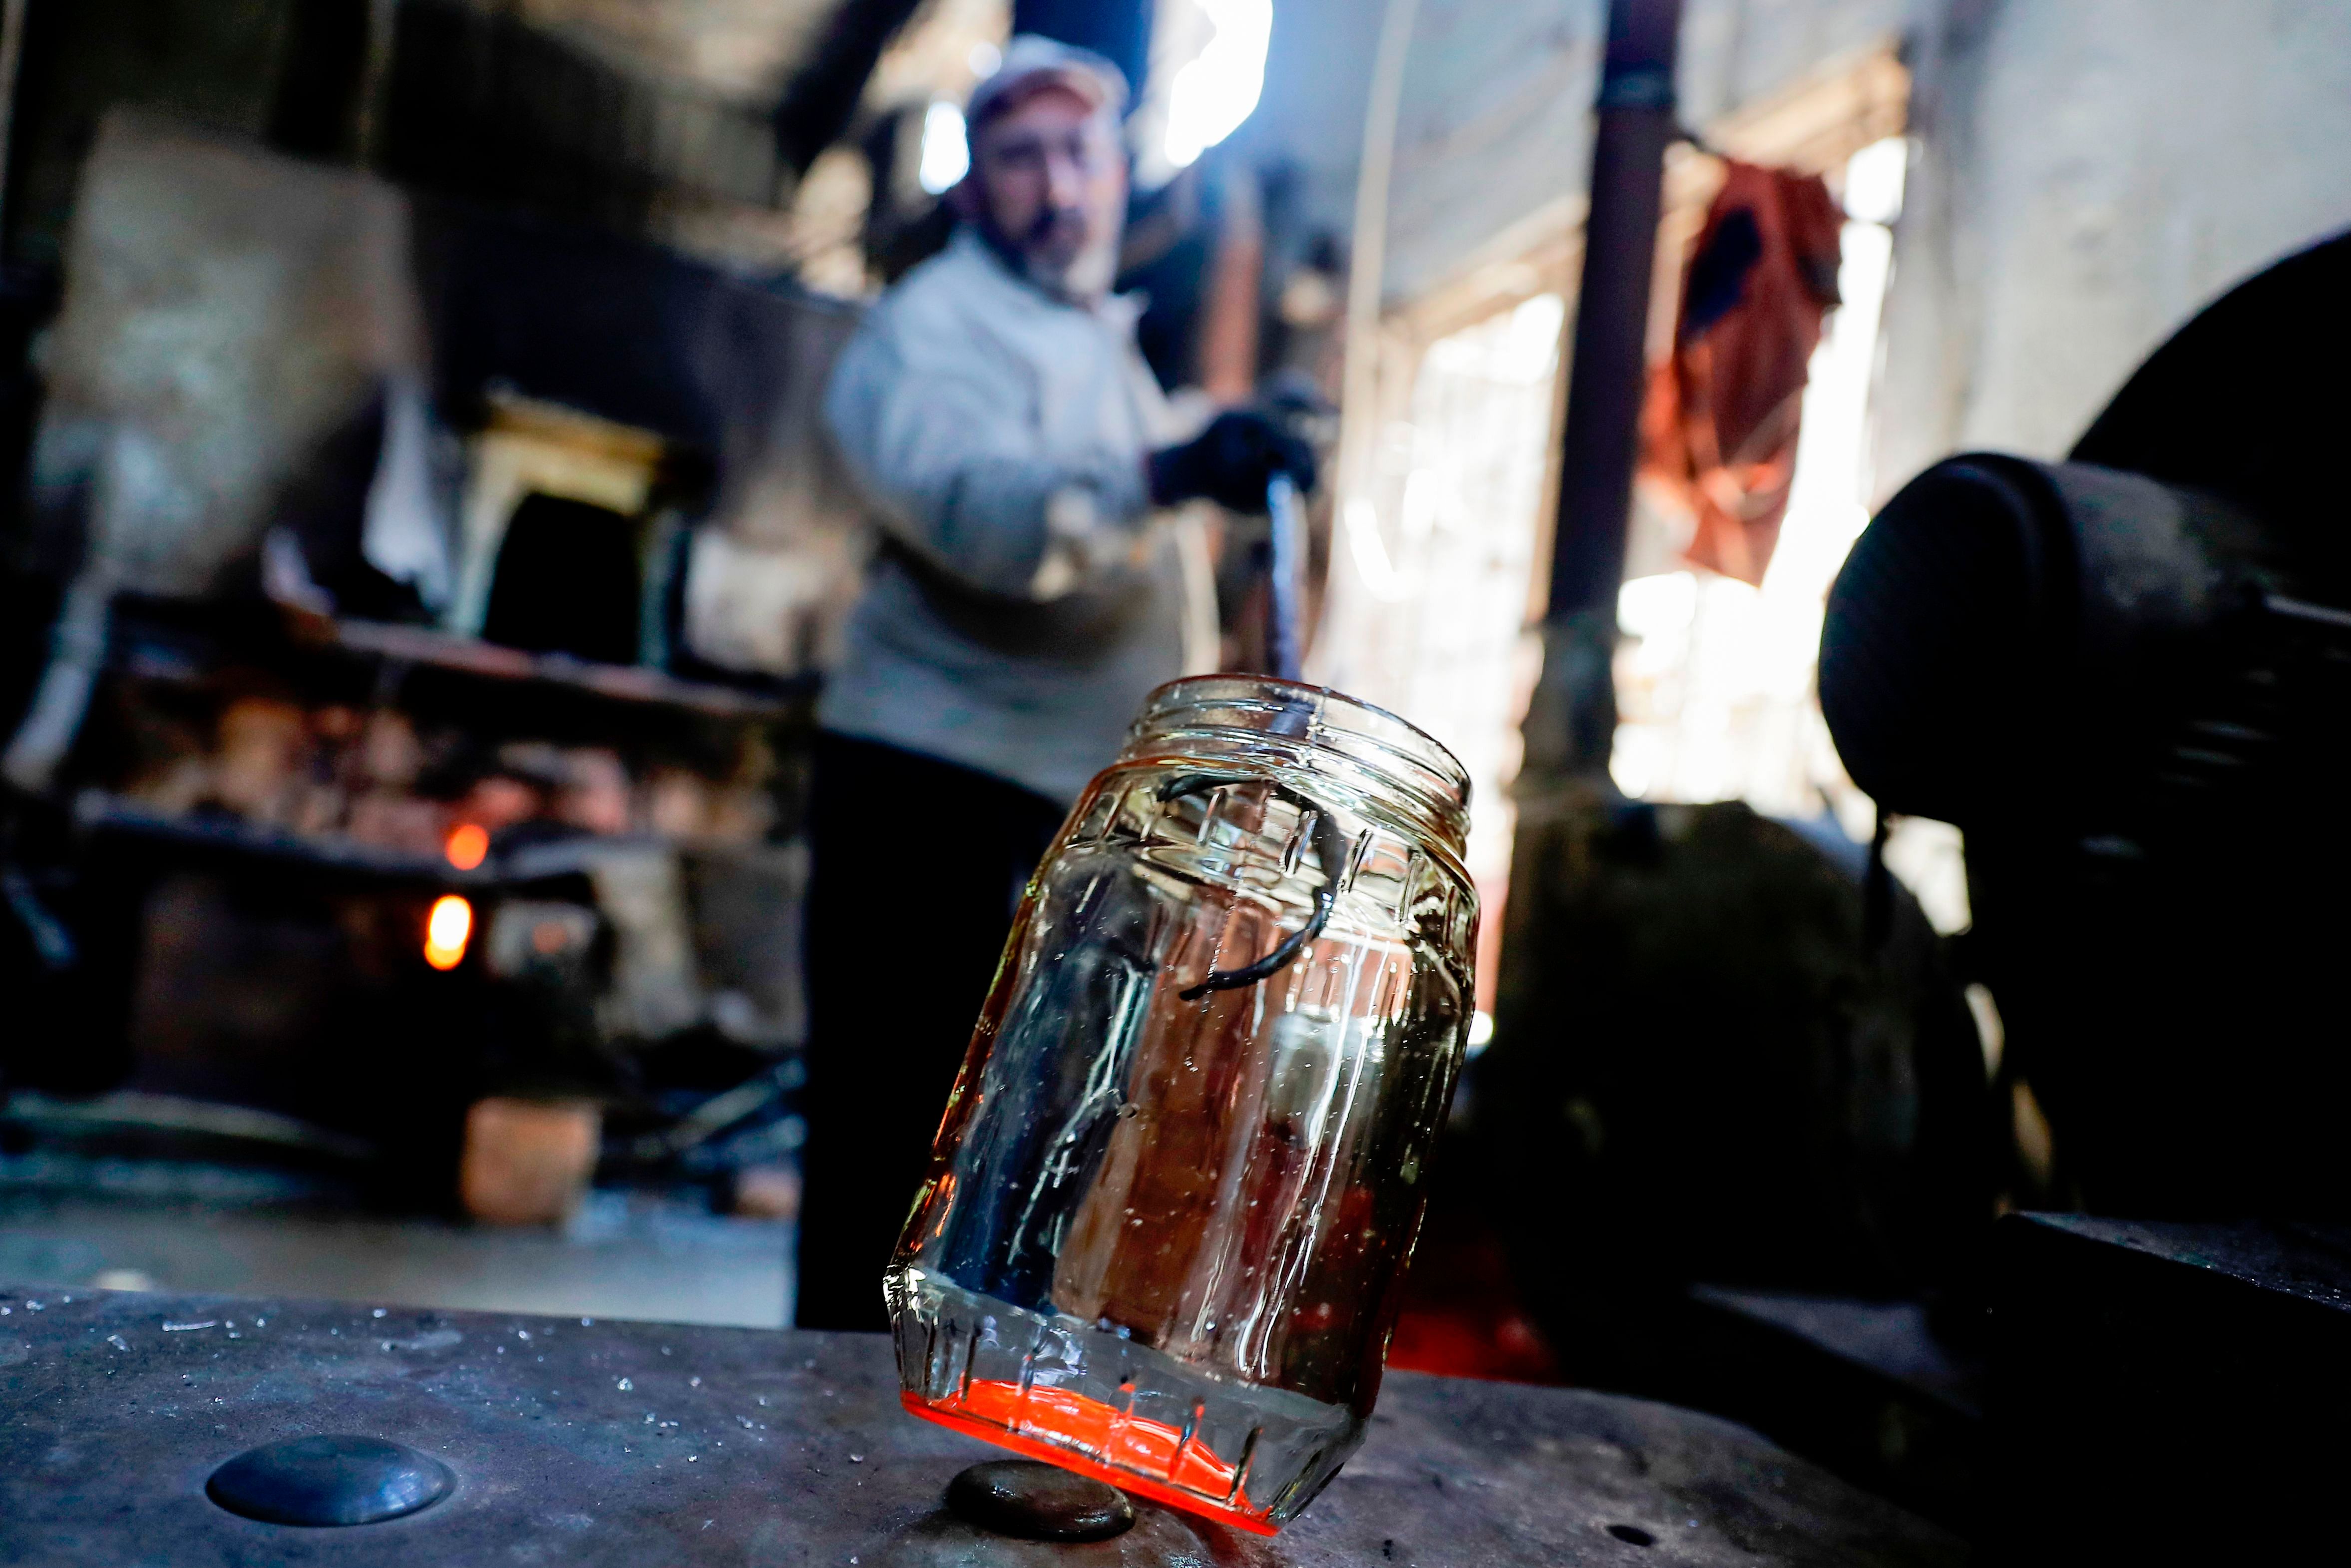 A glassblower forms glass at factory, which is recycling the broken glass as a result of the Beirut explosion, in the northern Lebanese port city of Tripoli on August 25, 2020. - The August 4 port explosion ripped through countless glass doors and windows when it laid waste to whole Beirut neighbourhoods, killing at least 190 people and wounding thousands more. Volunteers, non-governmental groups and entrepreneurs salvaged a fraction of the tonnes of broken glass that littered the streets, some of it through recycling at Wissam Hammoud's family's glass factory. Credit: AFP Photo